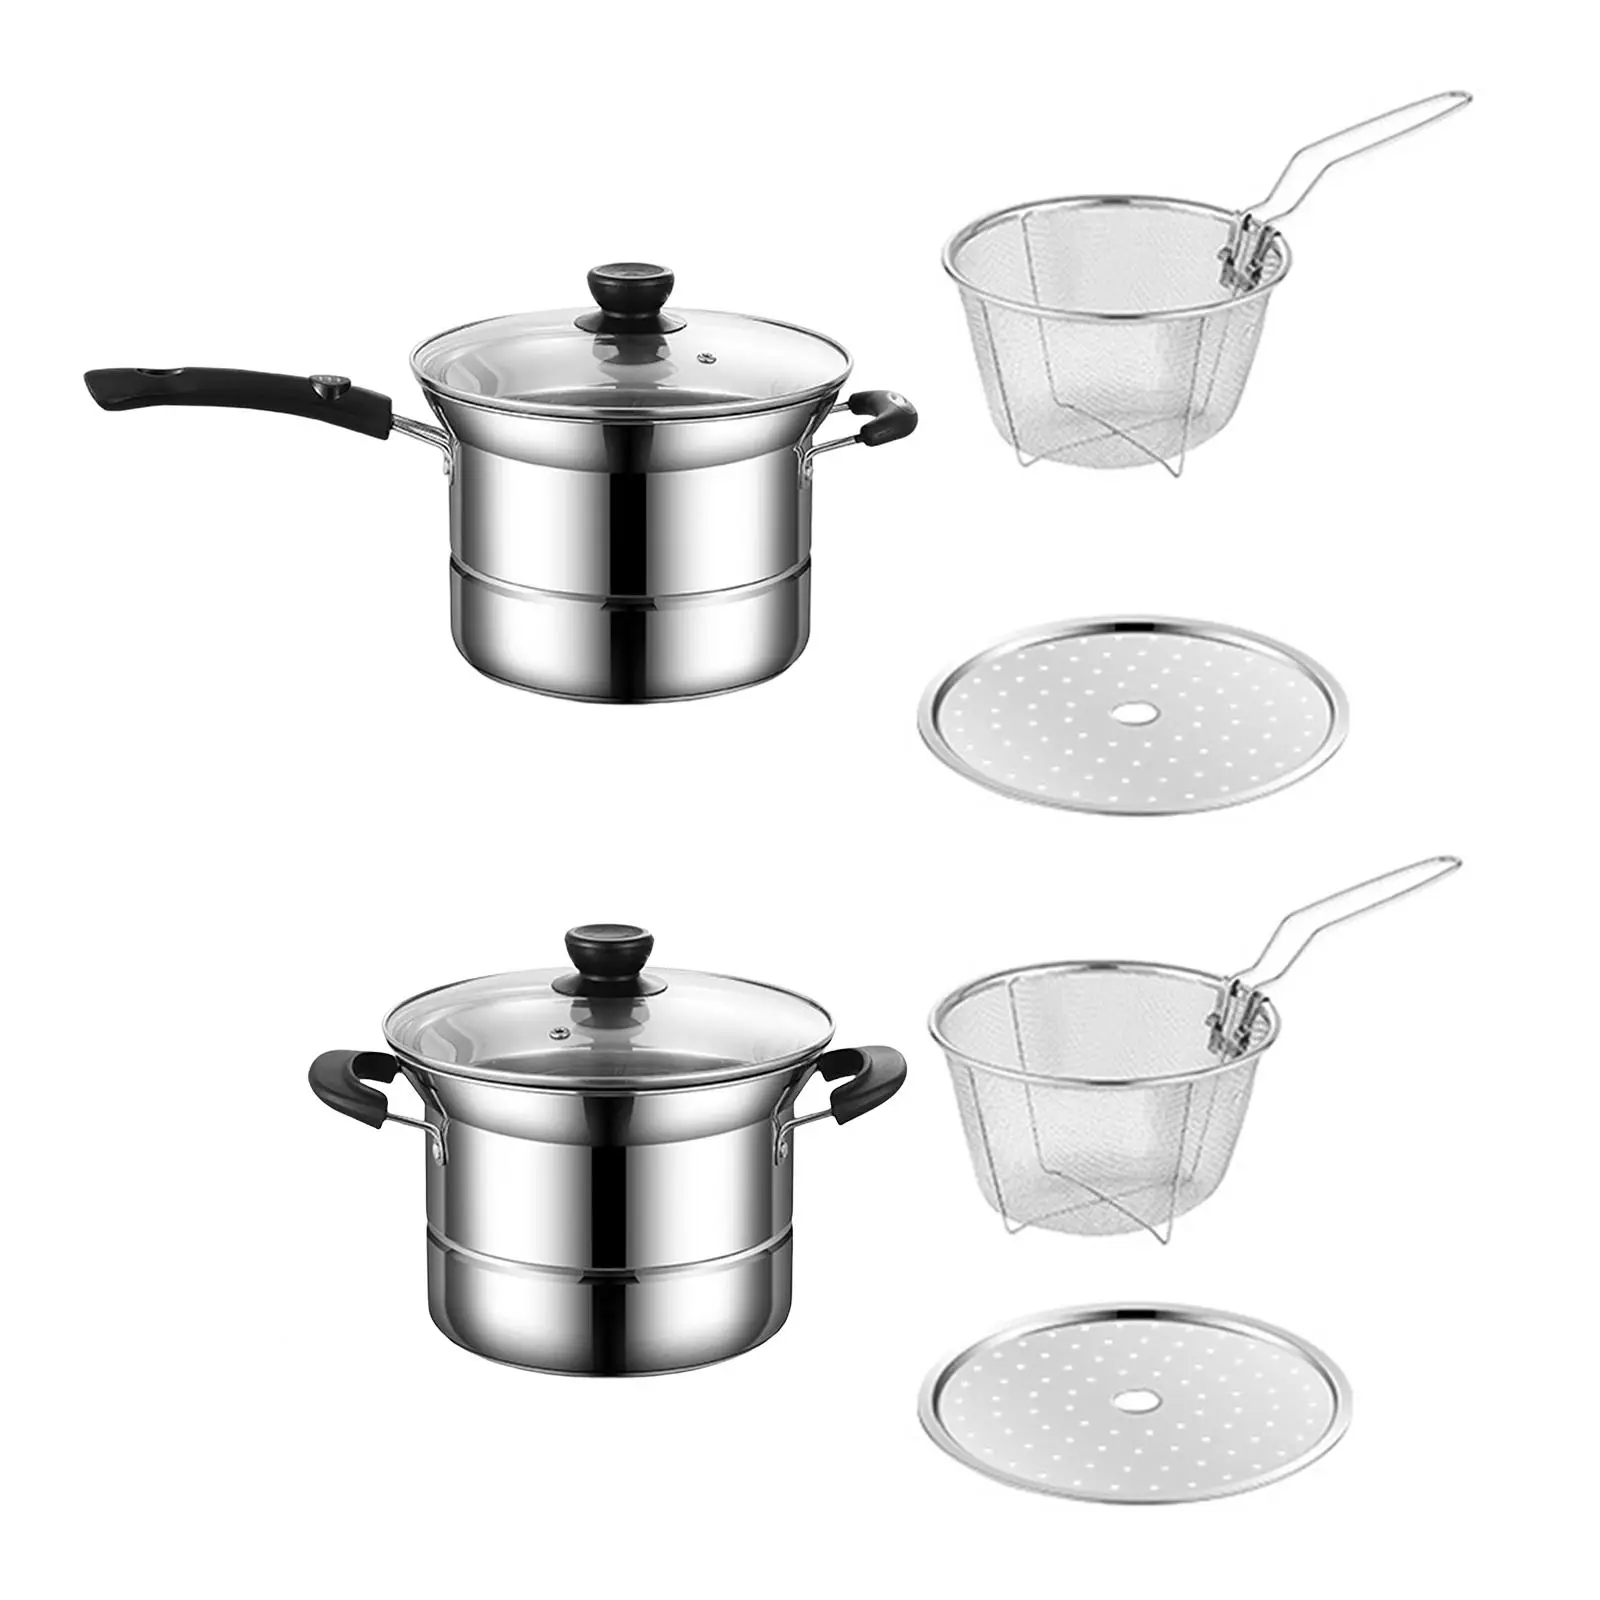 Stainless Steel Sauce Pan Milk Pot Cookware Sets Multipurpose with Lid Handle Cooker Cooking Pot for Pasta Picnic Restaurant